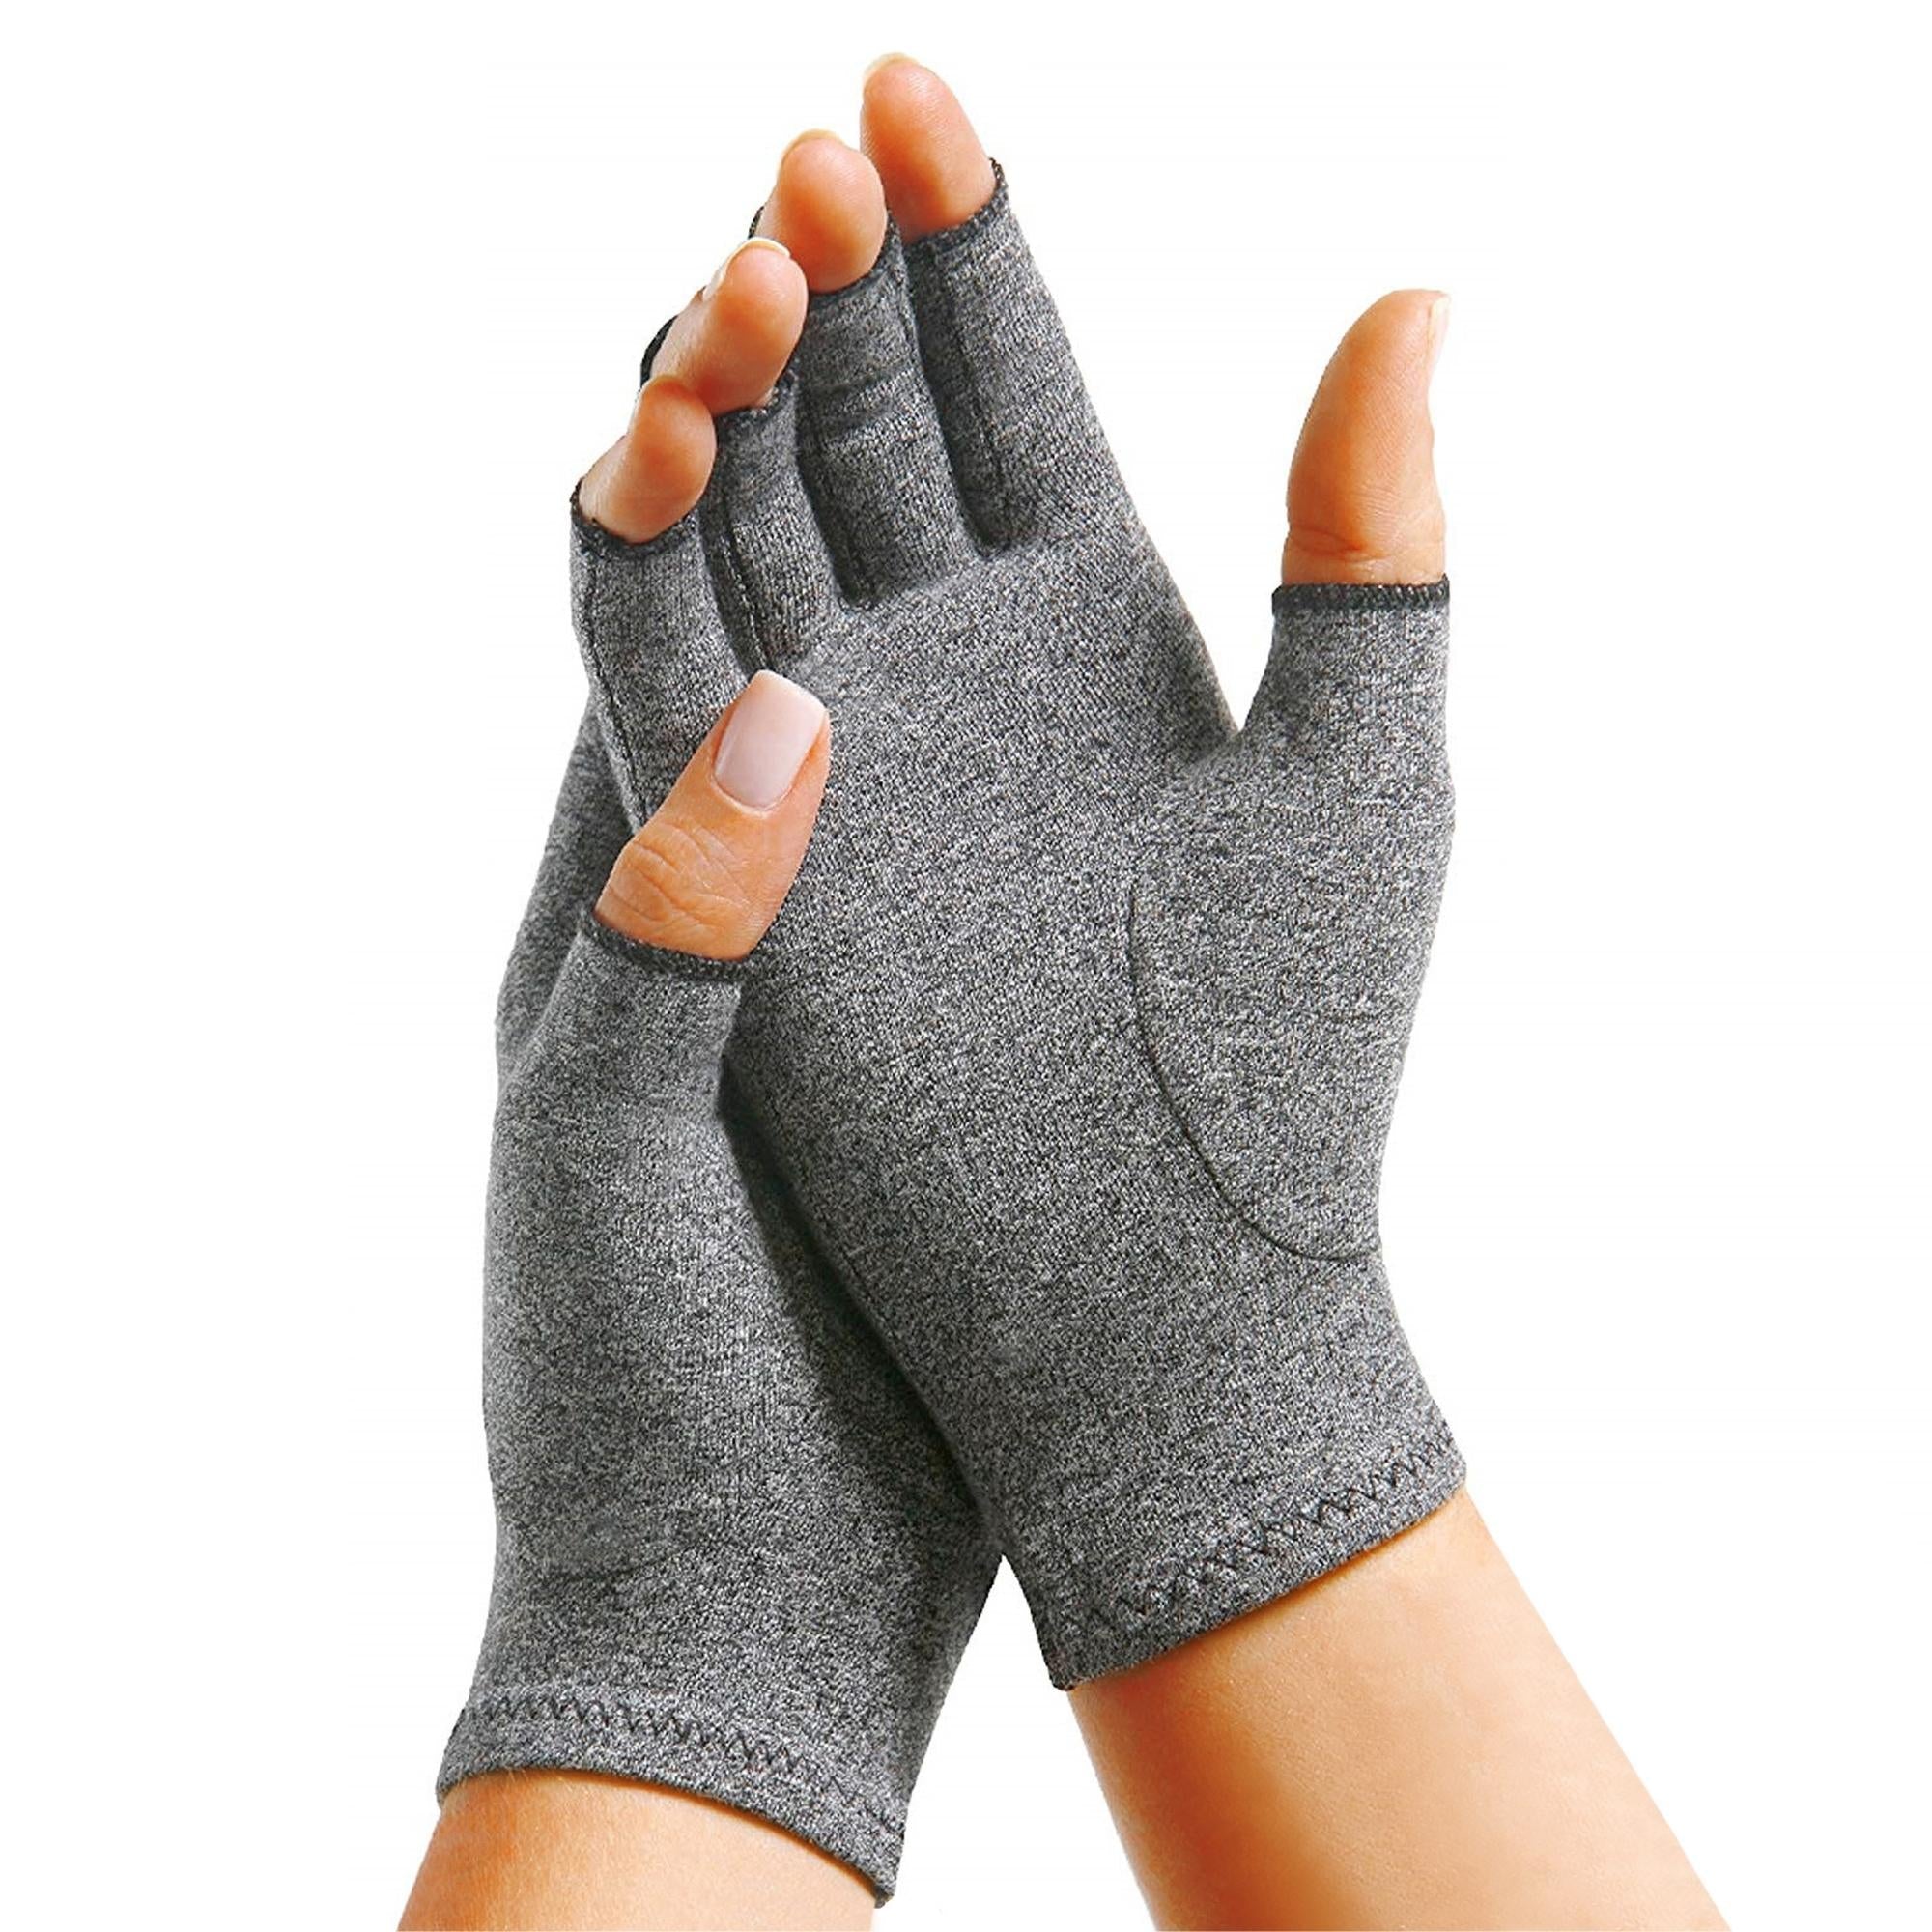 Hand Compression Gloves For Comfort And Ease